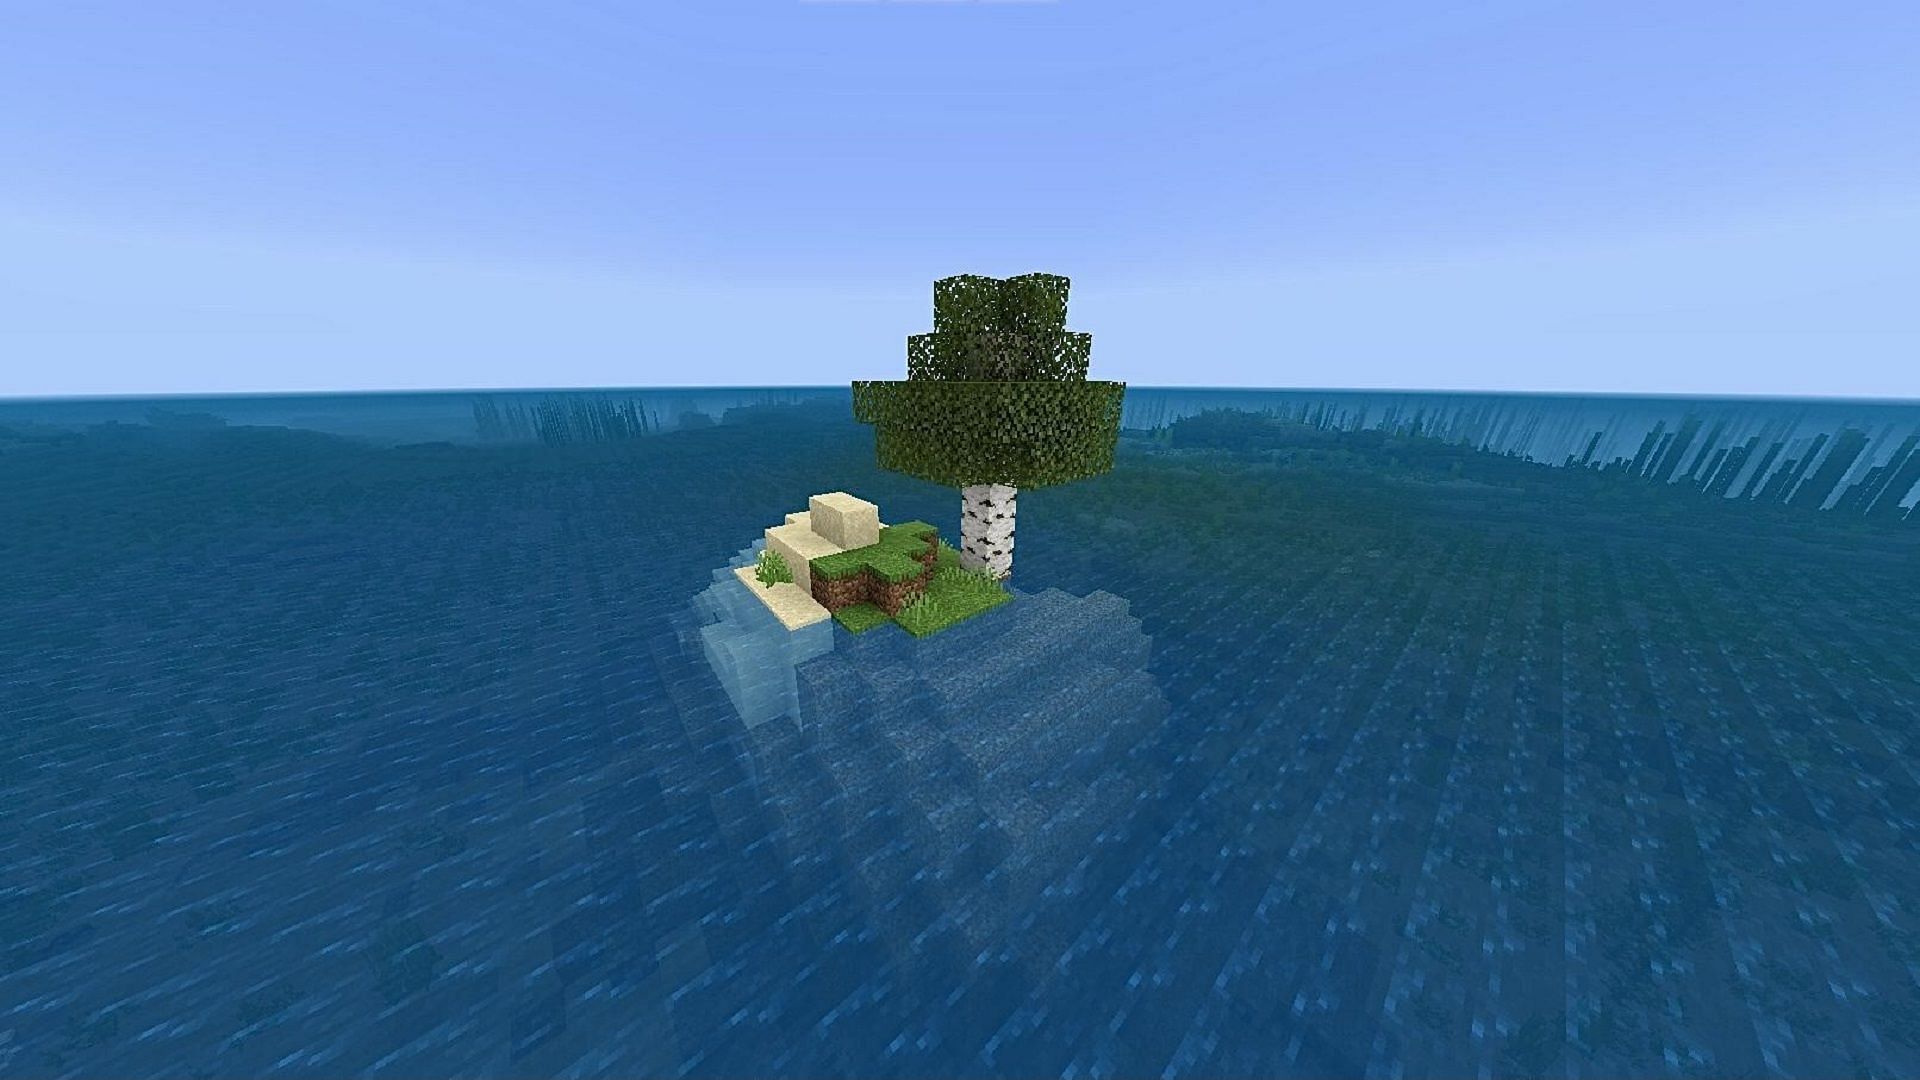 This seed offers an intense Survival Island experience (Image via YourLocalKnight/Reddit)